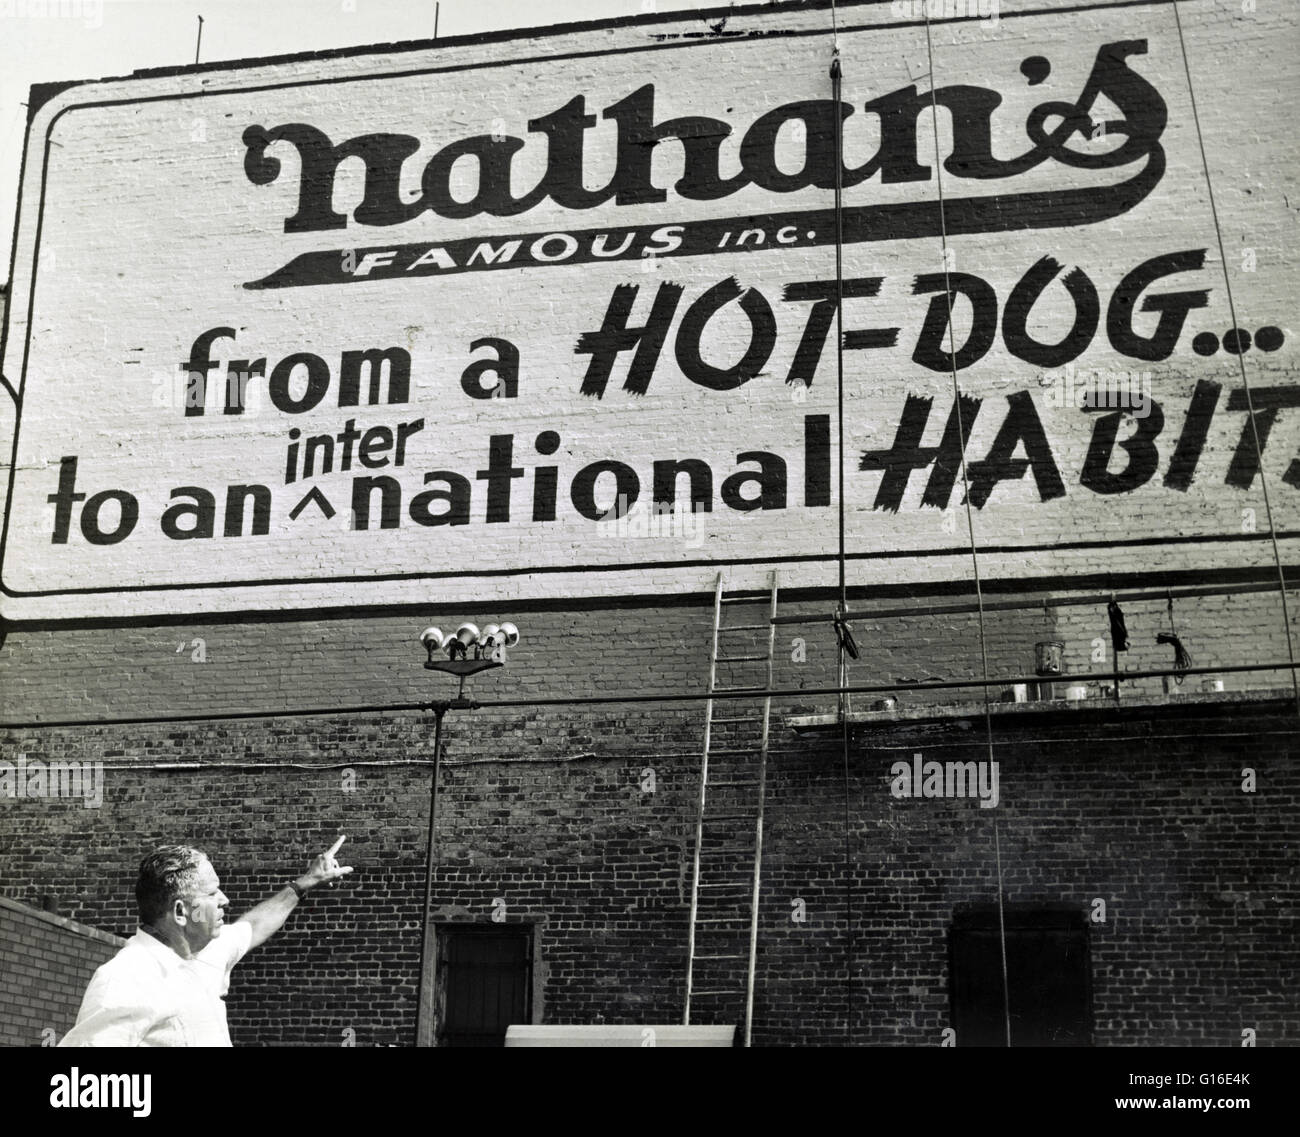 Entitled: 'From a hot dog to an international habit' showing Nathan Handwerker pointing to restaurant sign painted on outside wall.  Nathan's Famous, Inc. is an American company that operates a chain of fast food restaurants specializing in hot dogs. Nath Stock Photo